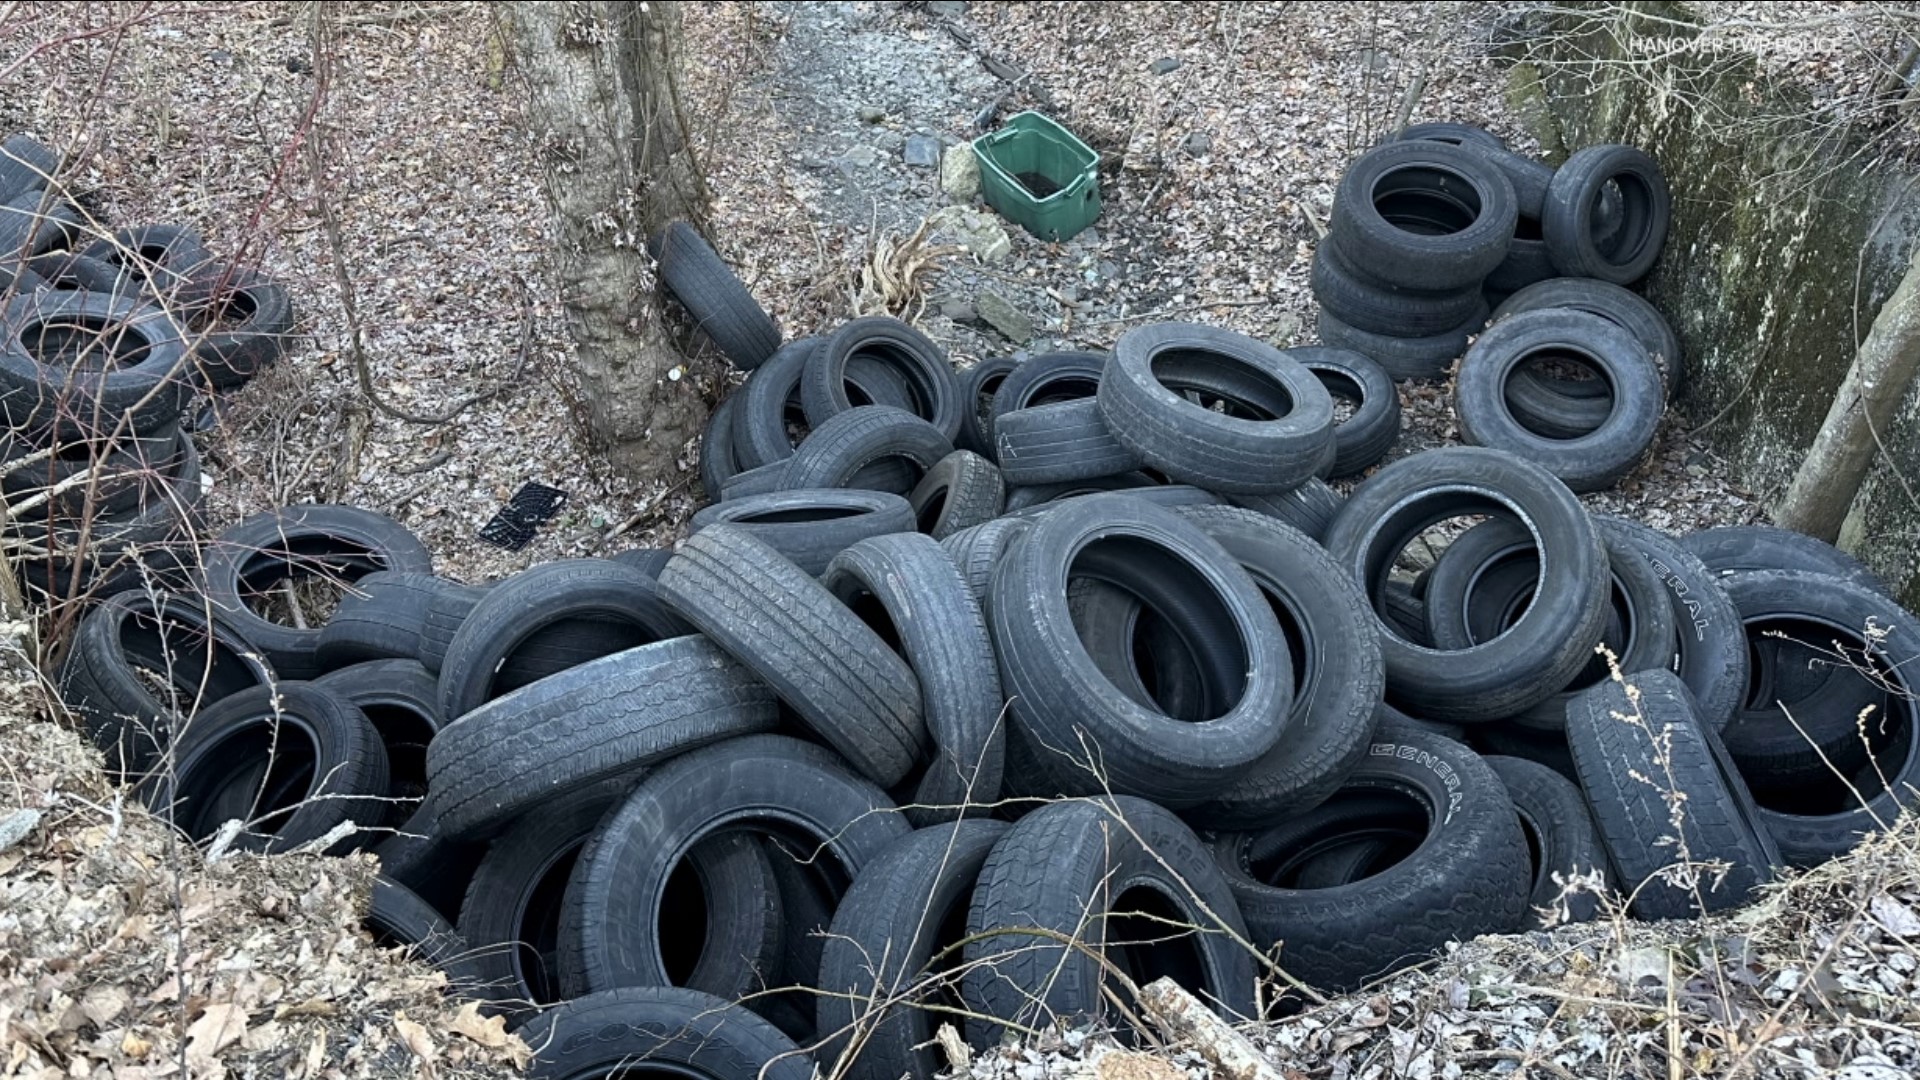 Police in Luzerne County are investigating after dozens of tires were dumped into a creek.